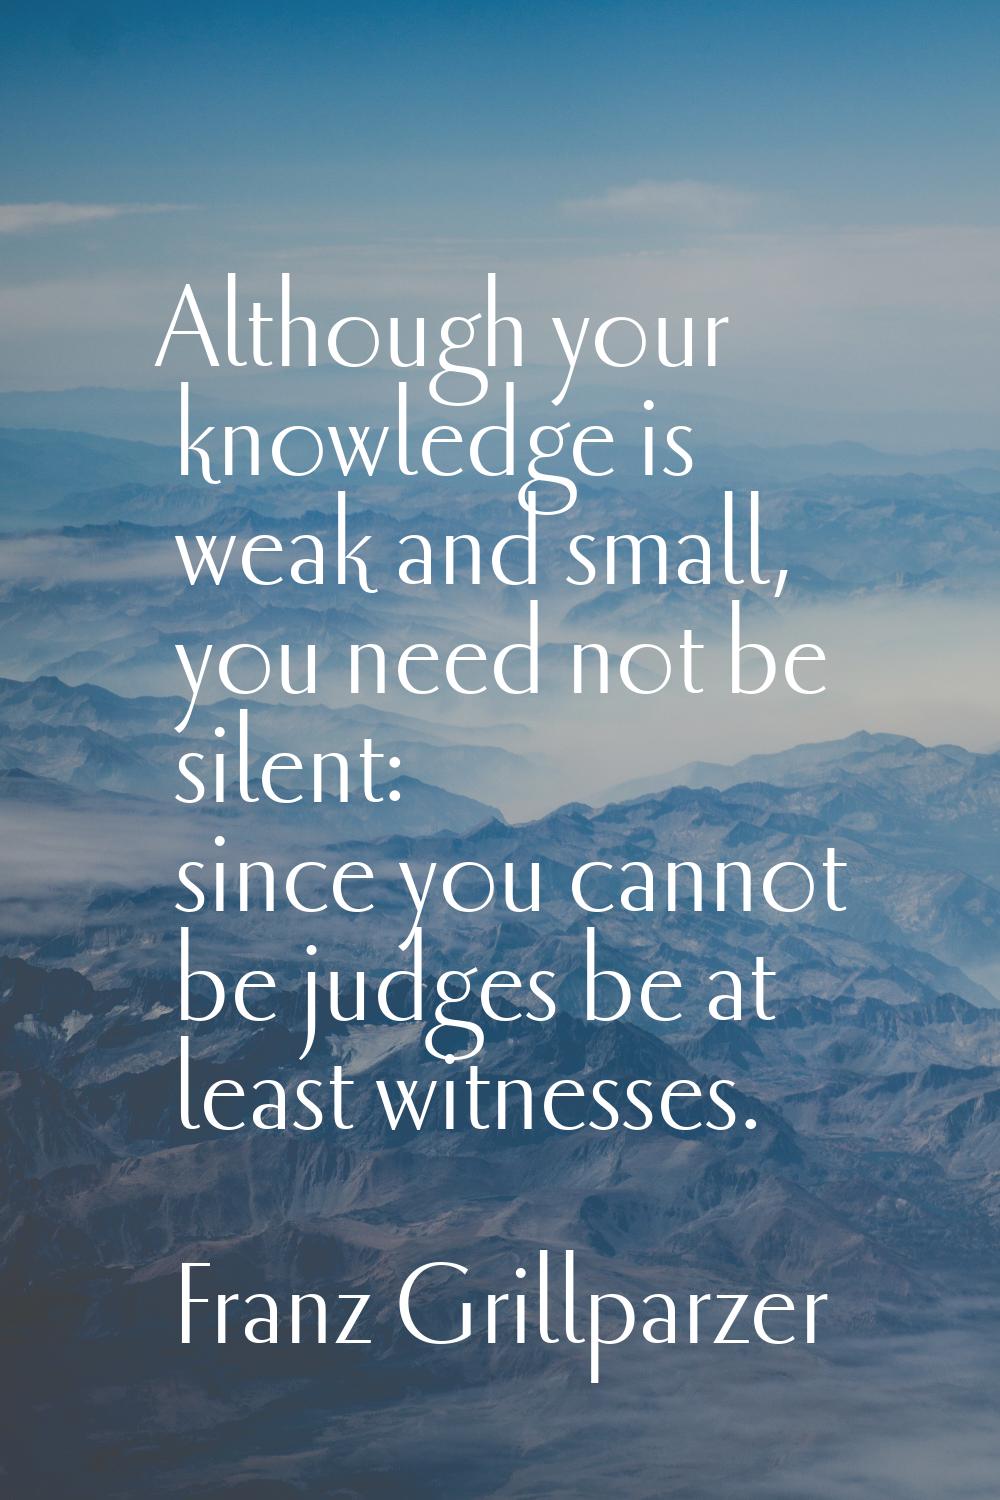 Although your knowledge is weak and small, you need not be silent: since you cannot be judges be at